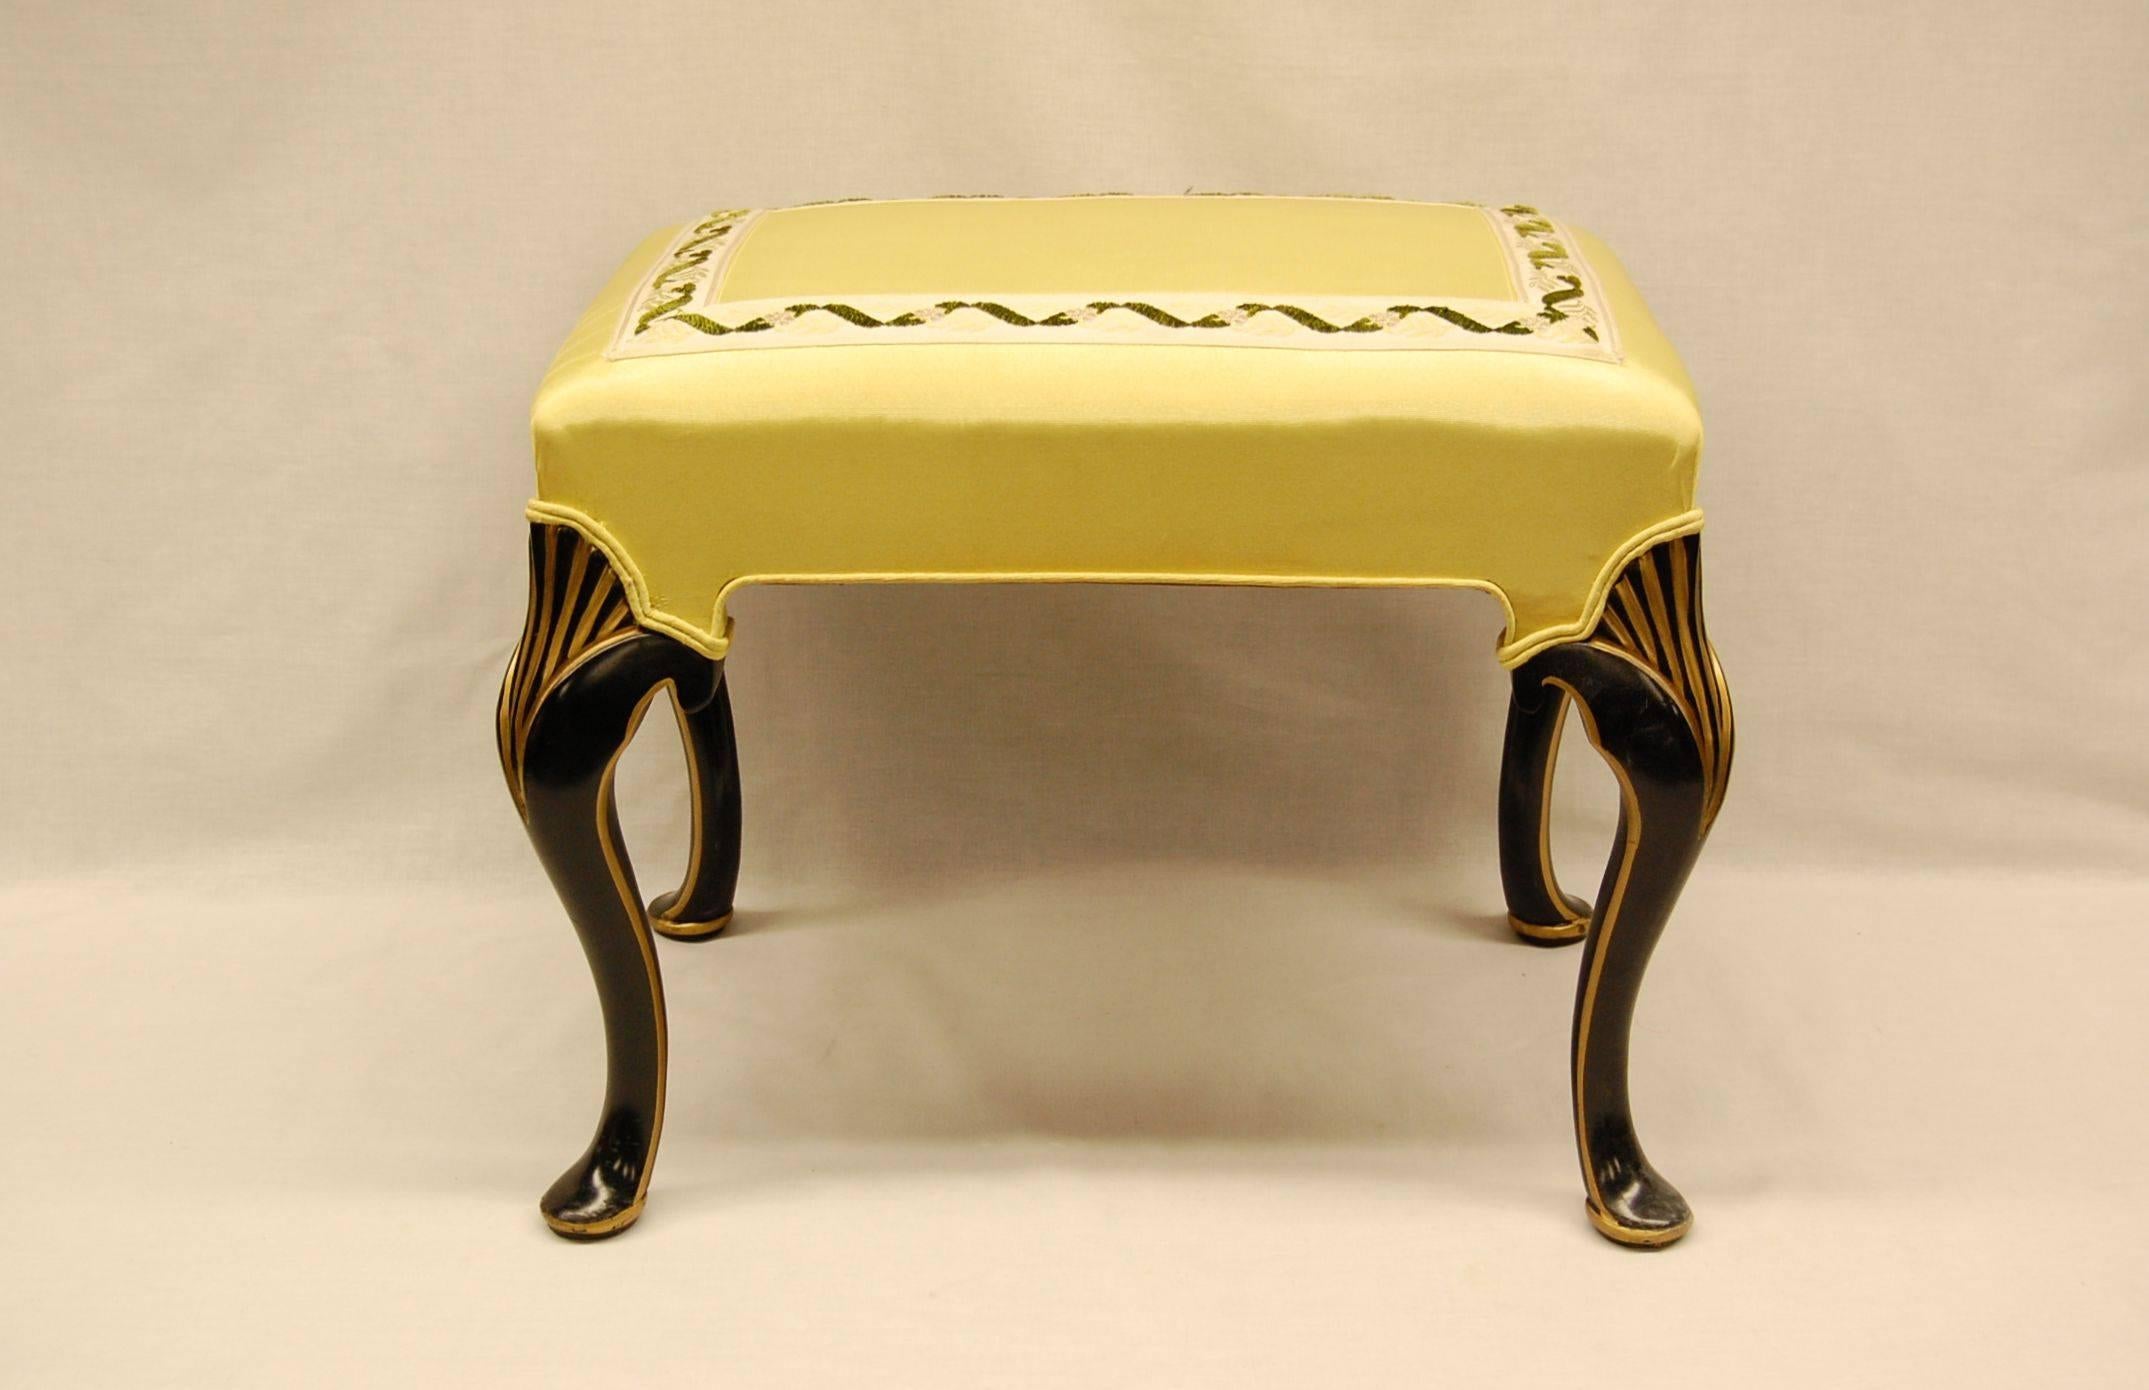 Bench in excellent condition covered in yellow moire fabric with braid on the top surface. Black painted legs with gold accents.